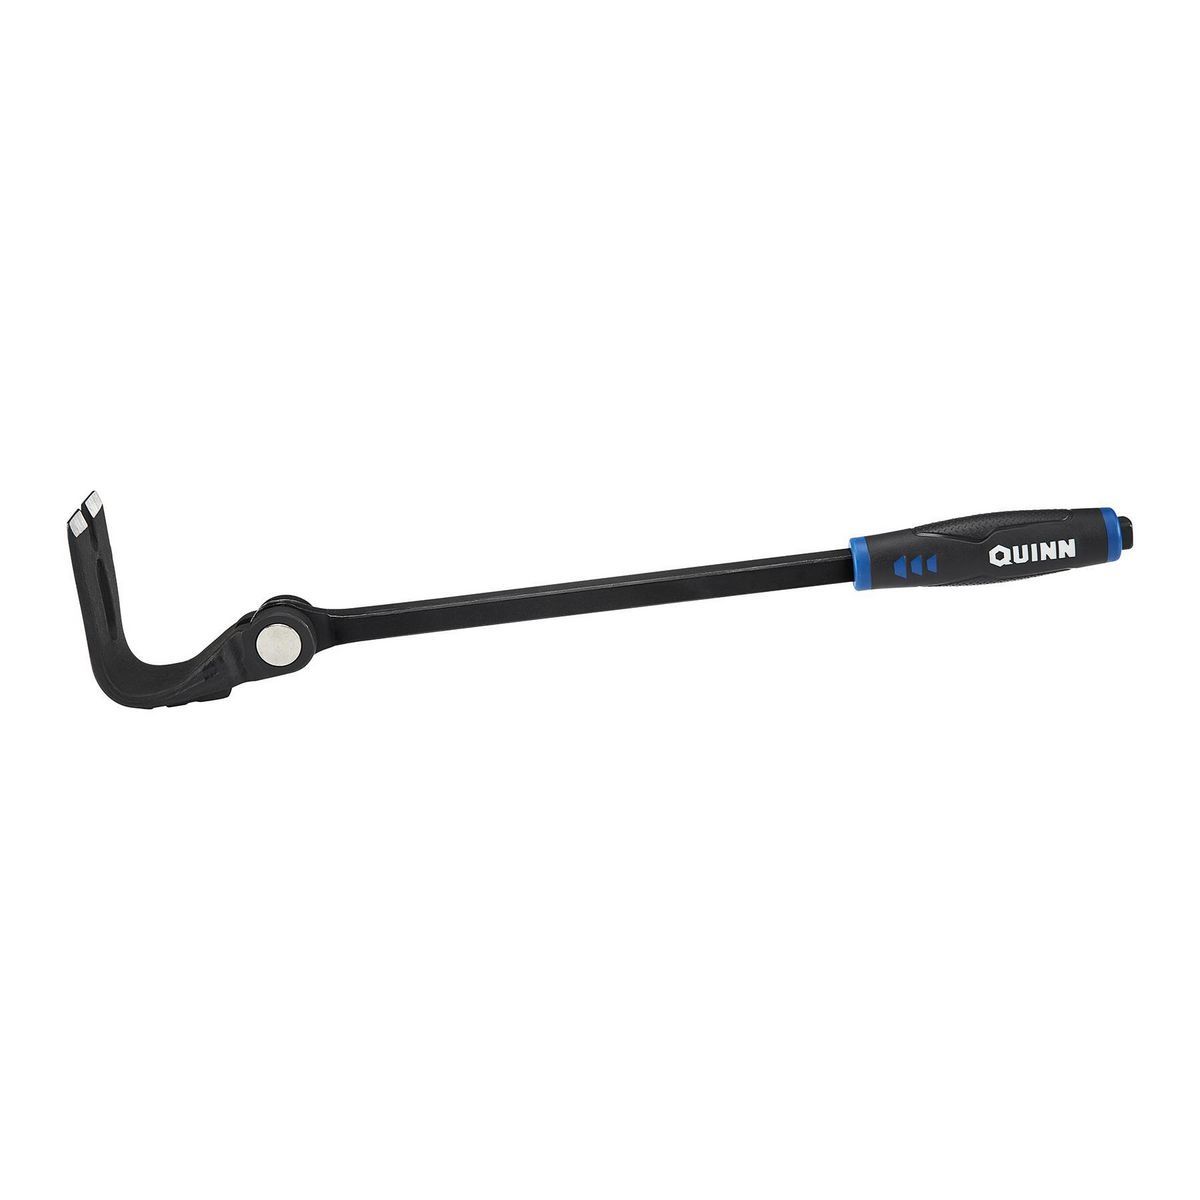 QUINN 18 In. Indexable Wrecking Bar